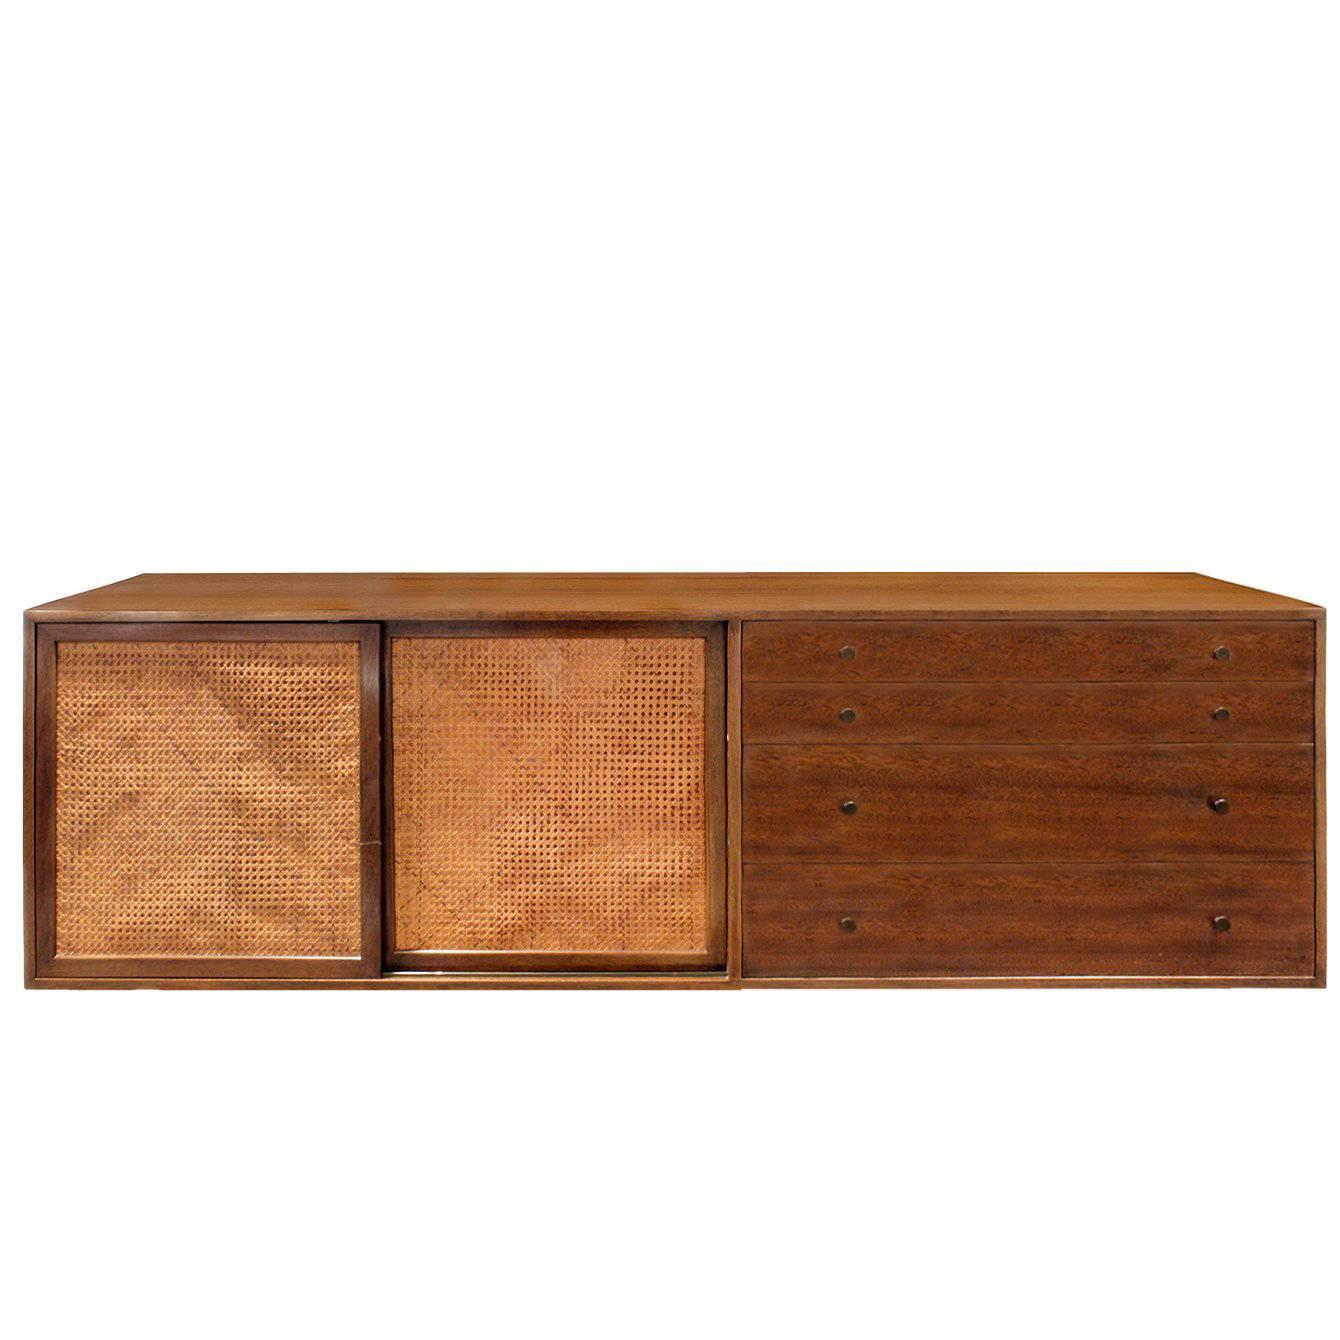 Harvey Probber Wall Mounted Credenza with Inset Caned Doors, 1950s